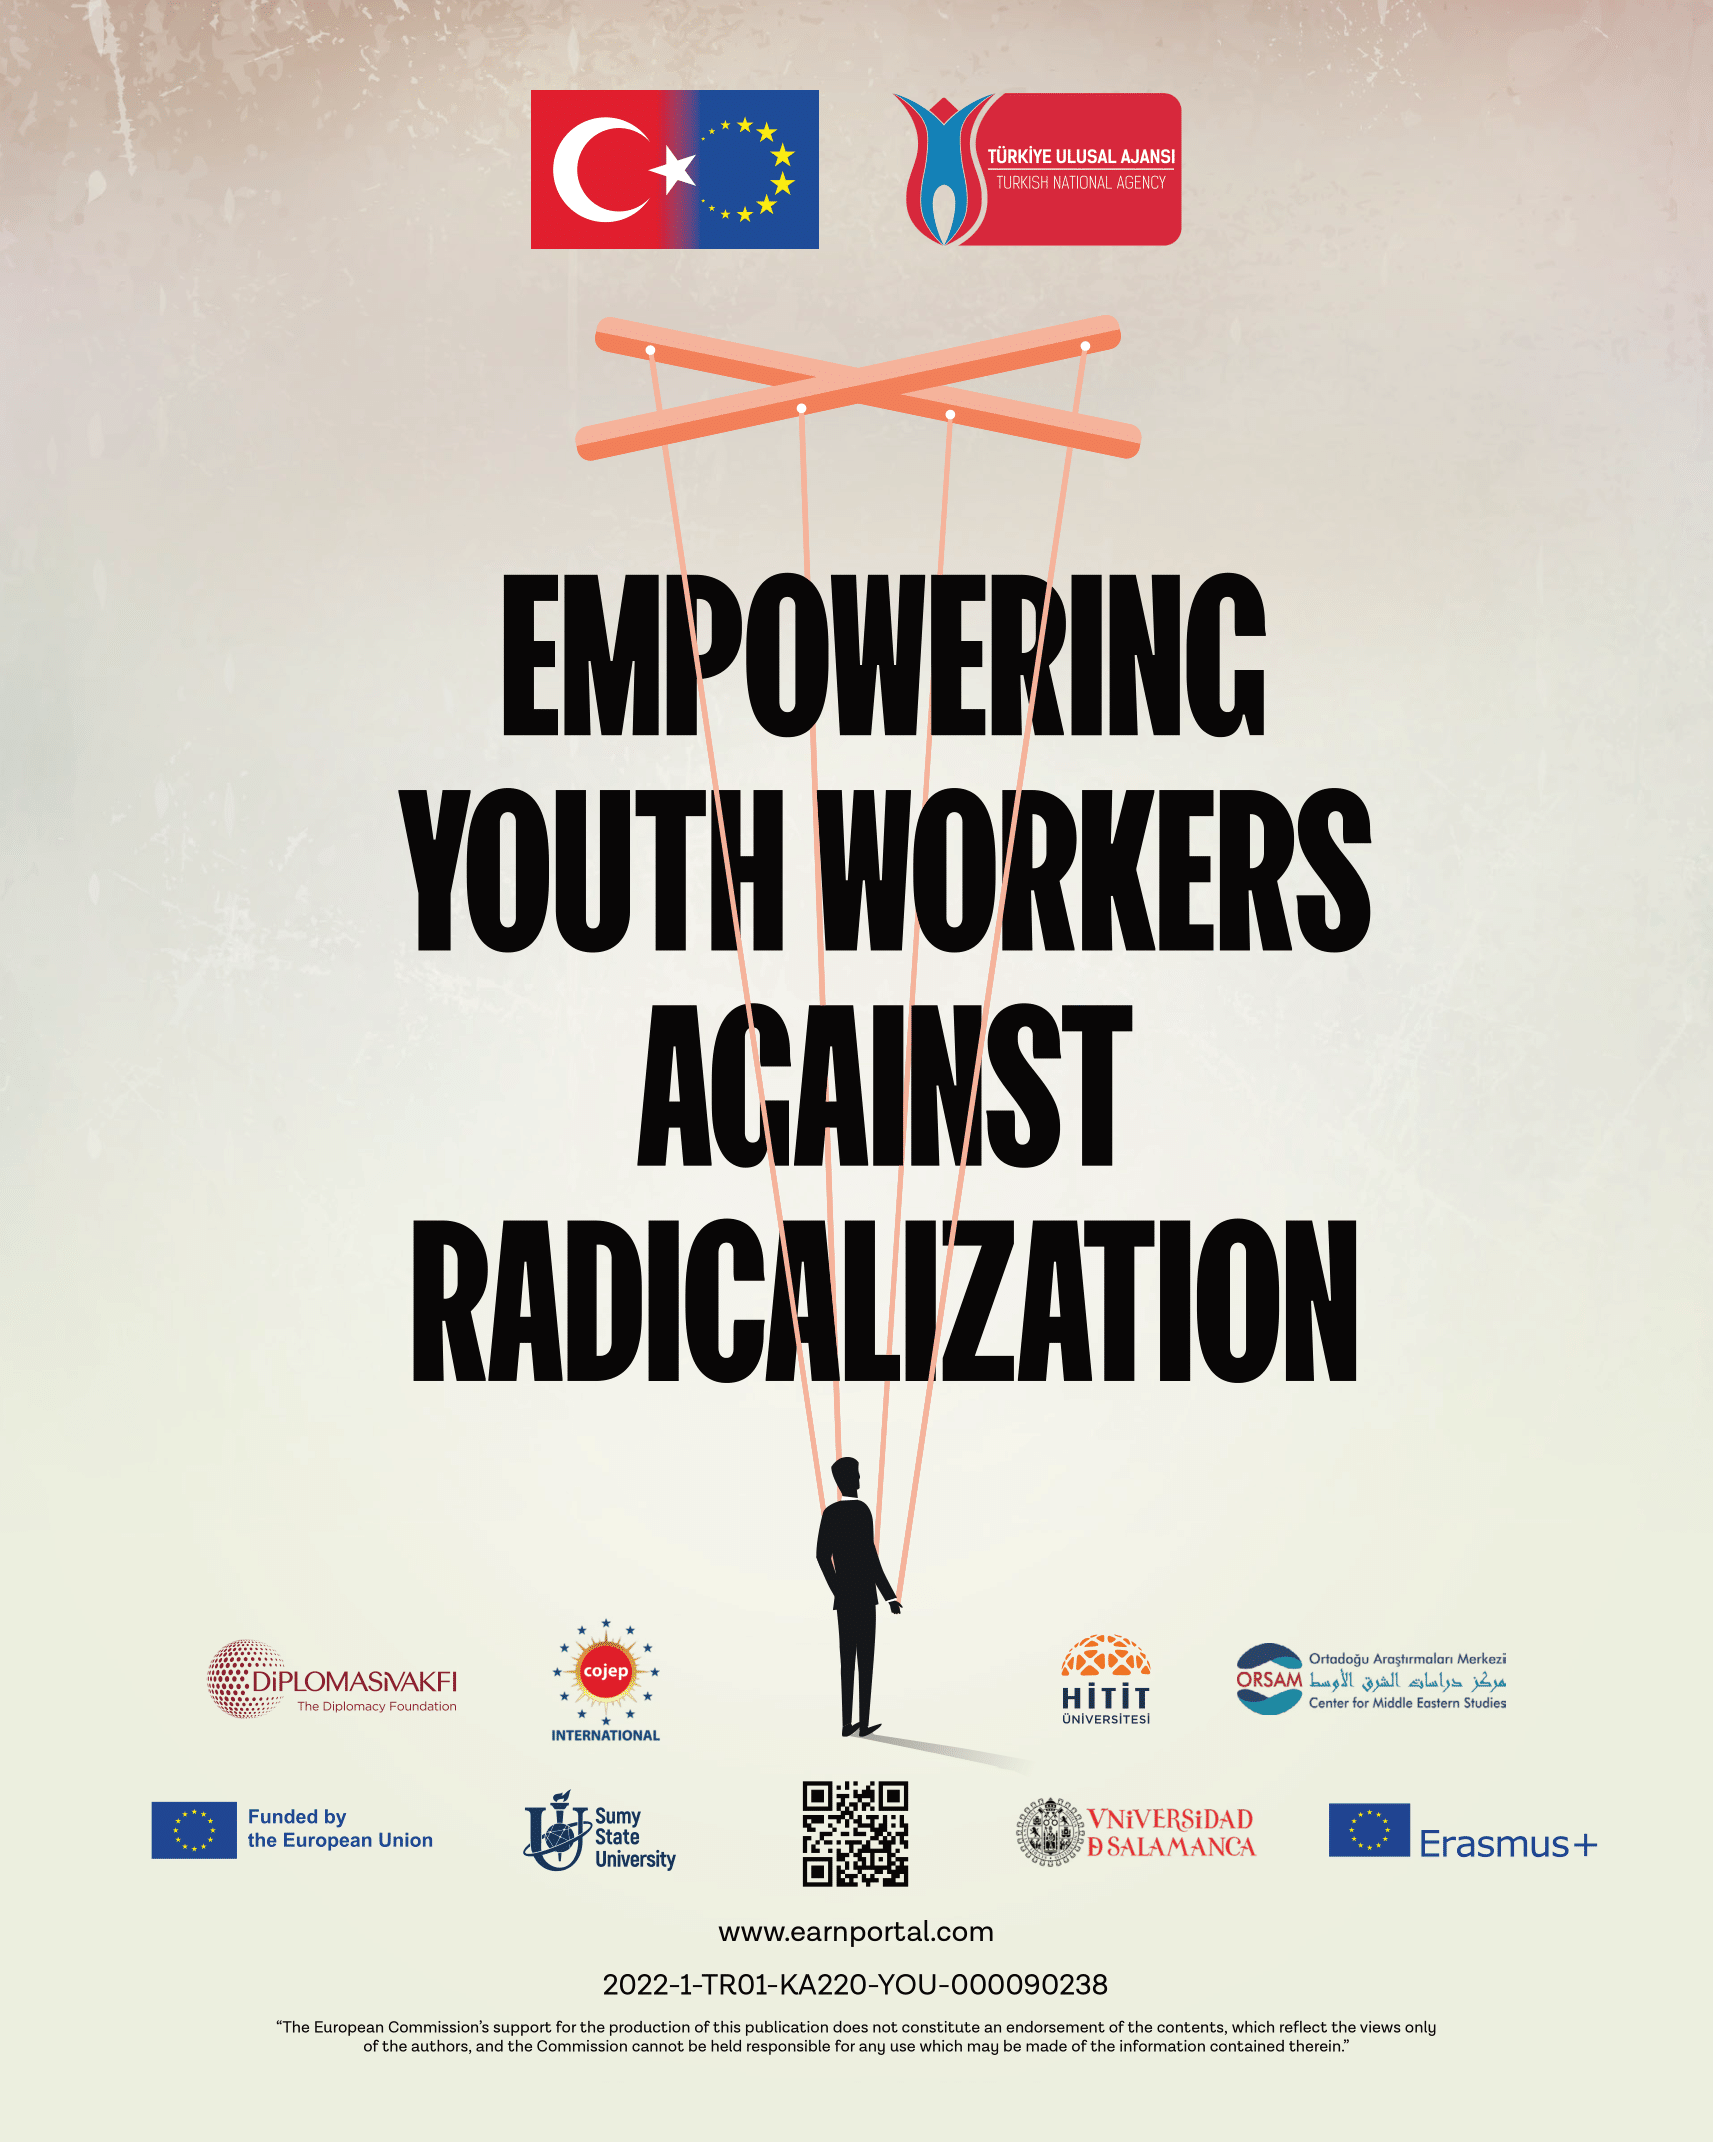 Empowering Youth Workers Against Radicalization